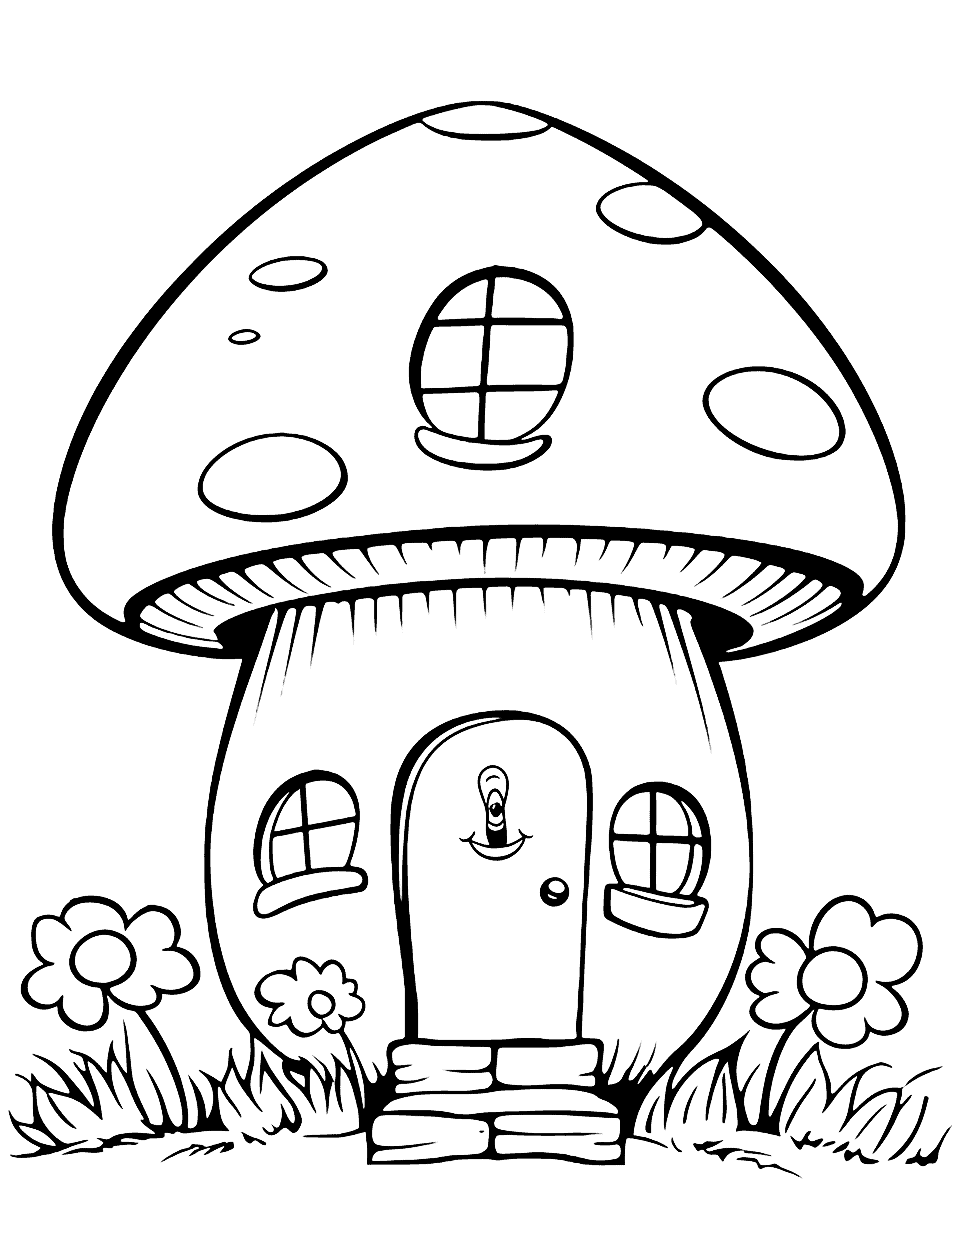 Happy Mushroom House Cute Coloring Page - A mushroom-shaped house with a smiling face and a door.